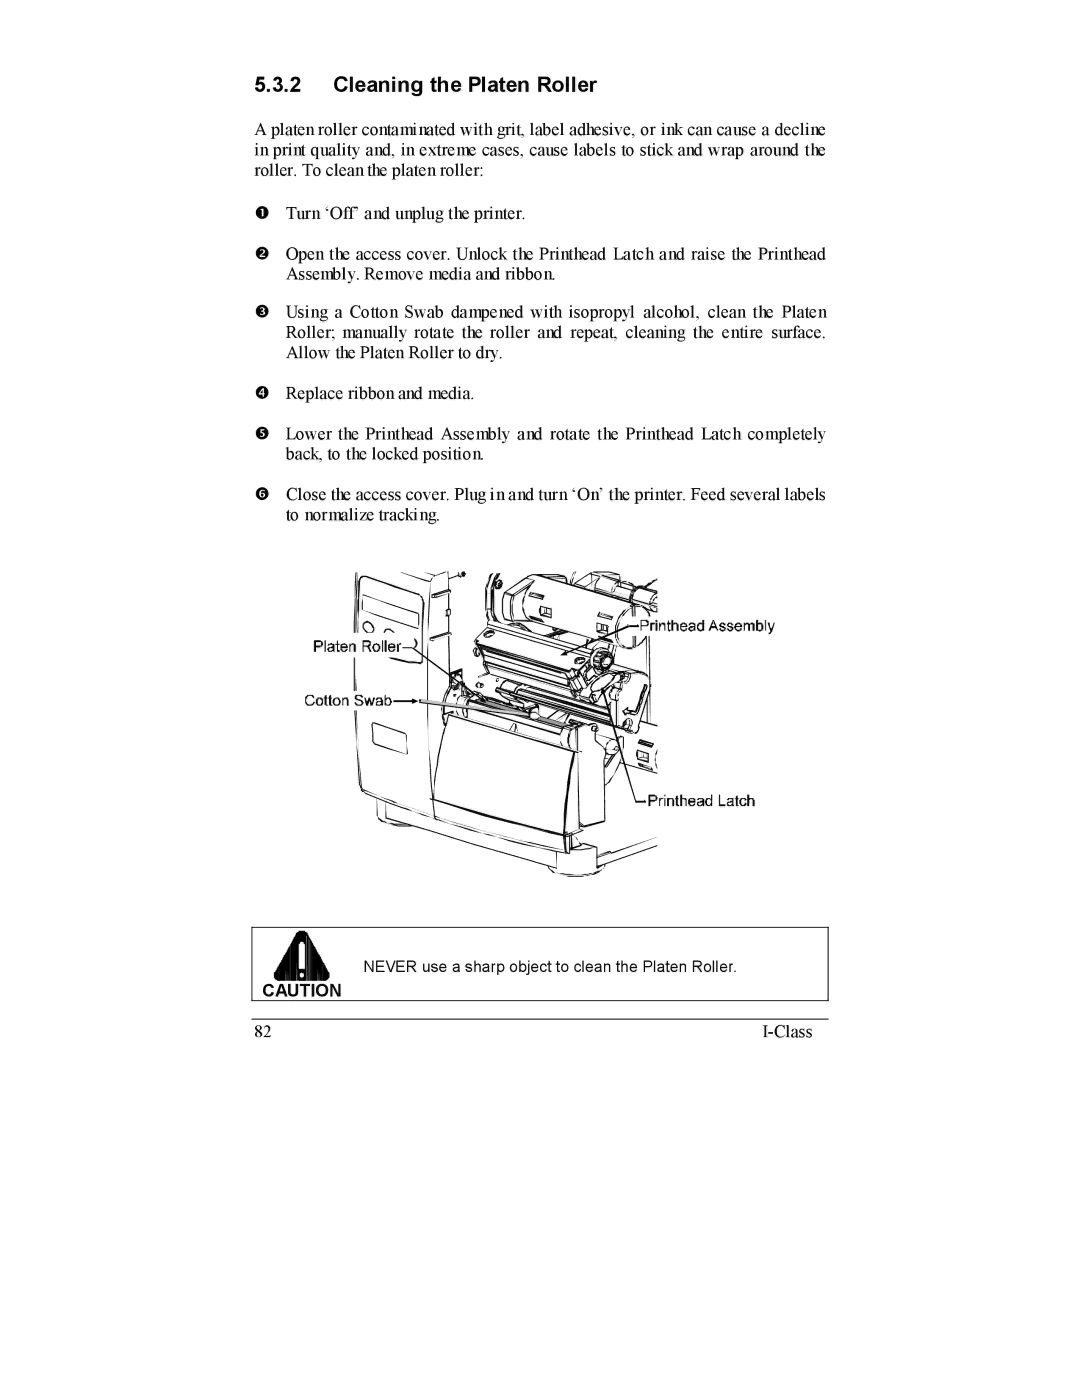 Datamax I-4206, I-4208 manual Cleaning the Platen Roller 